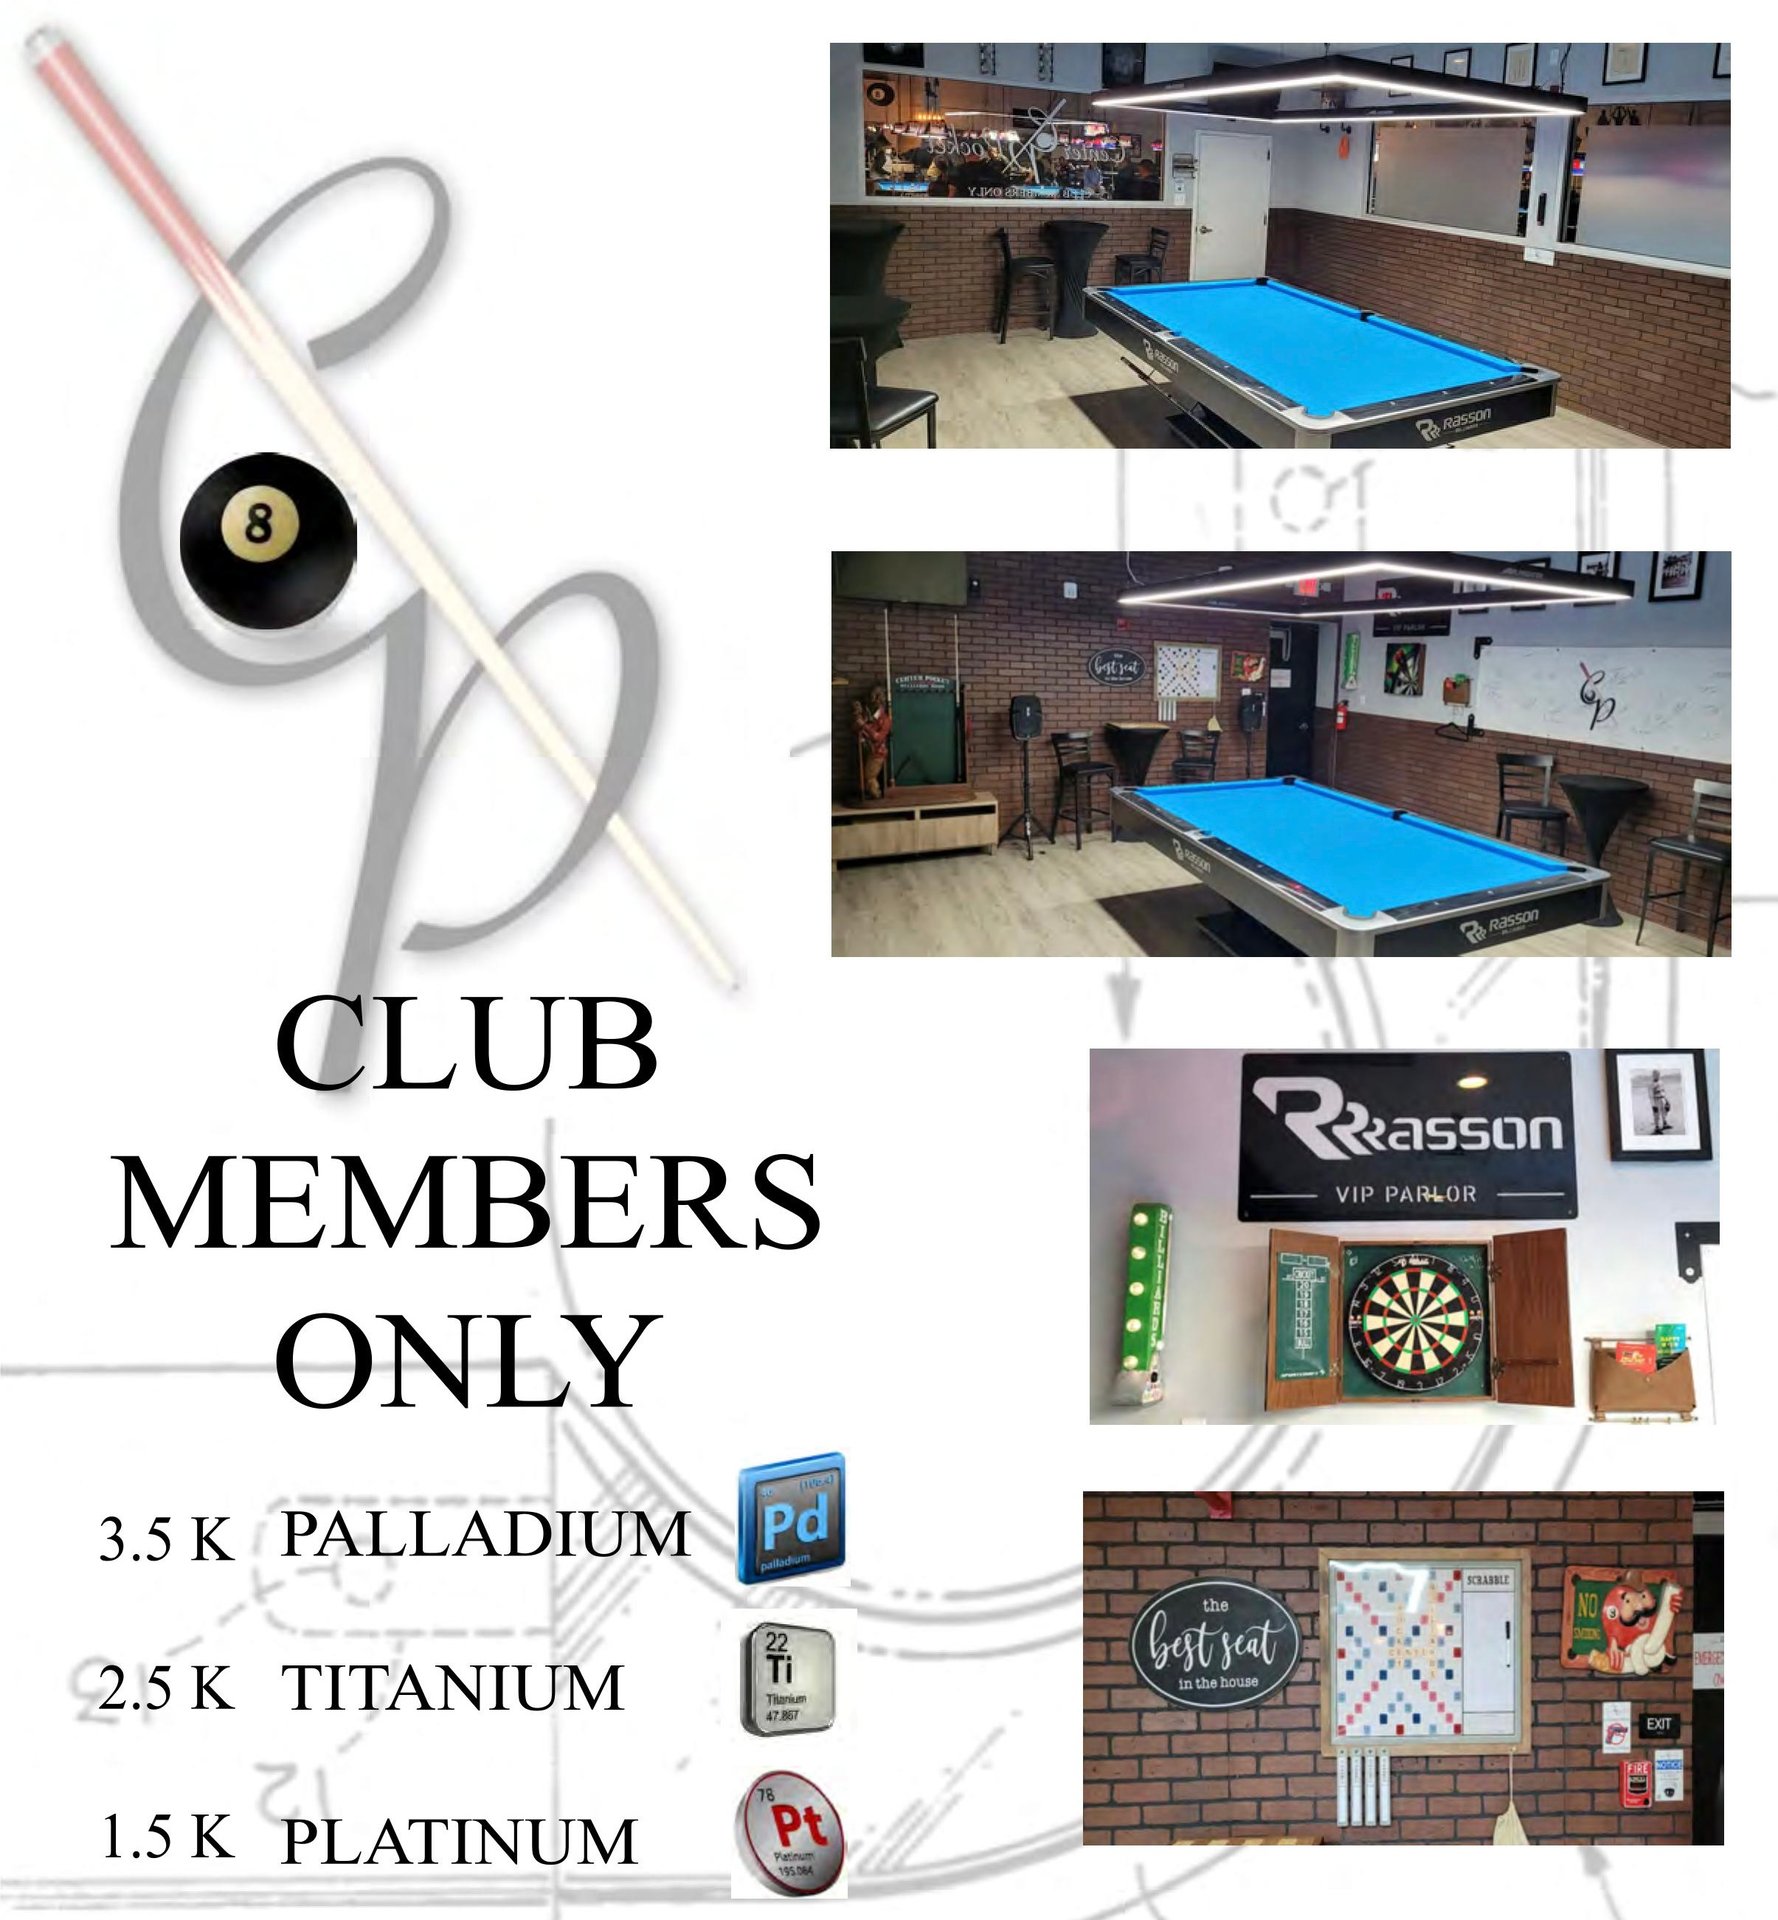 Suite Members Only